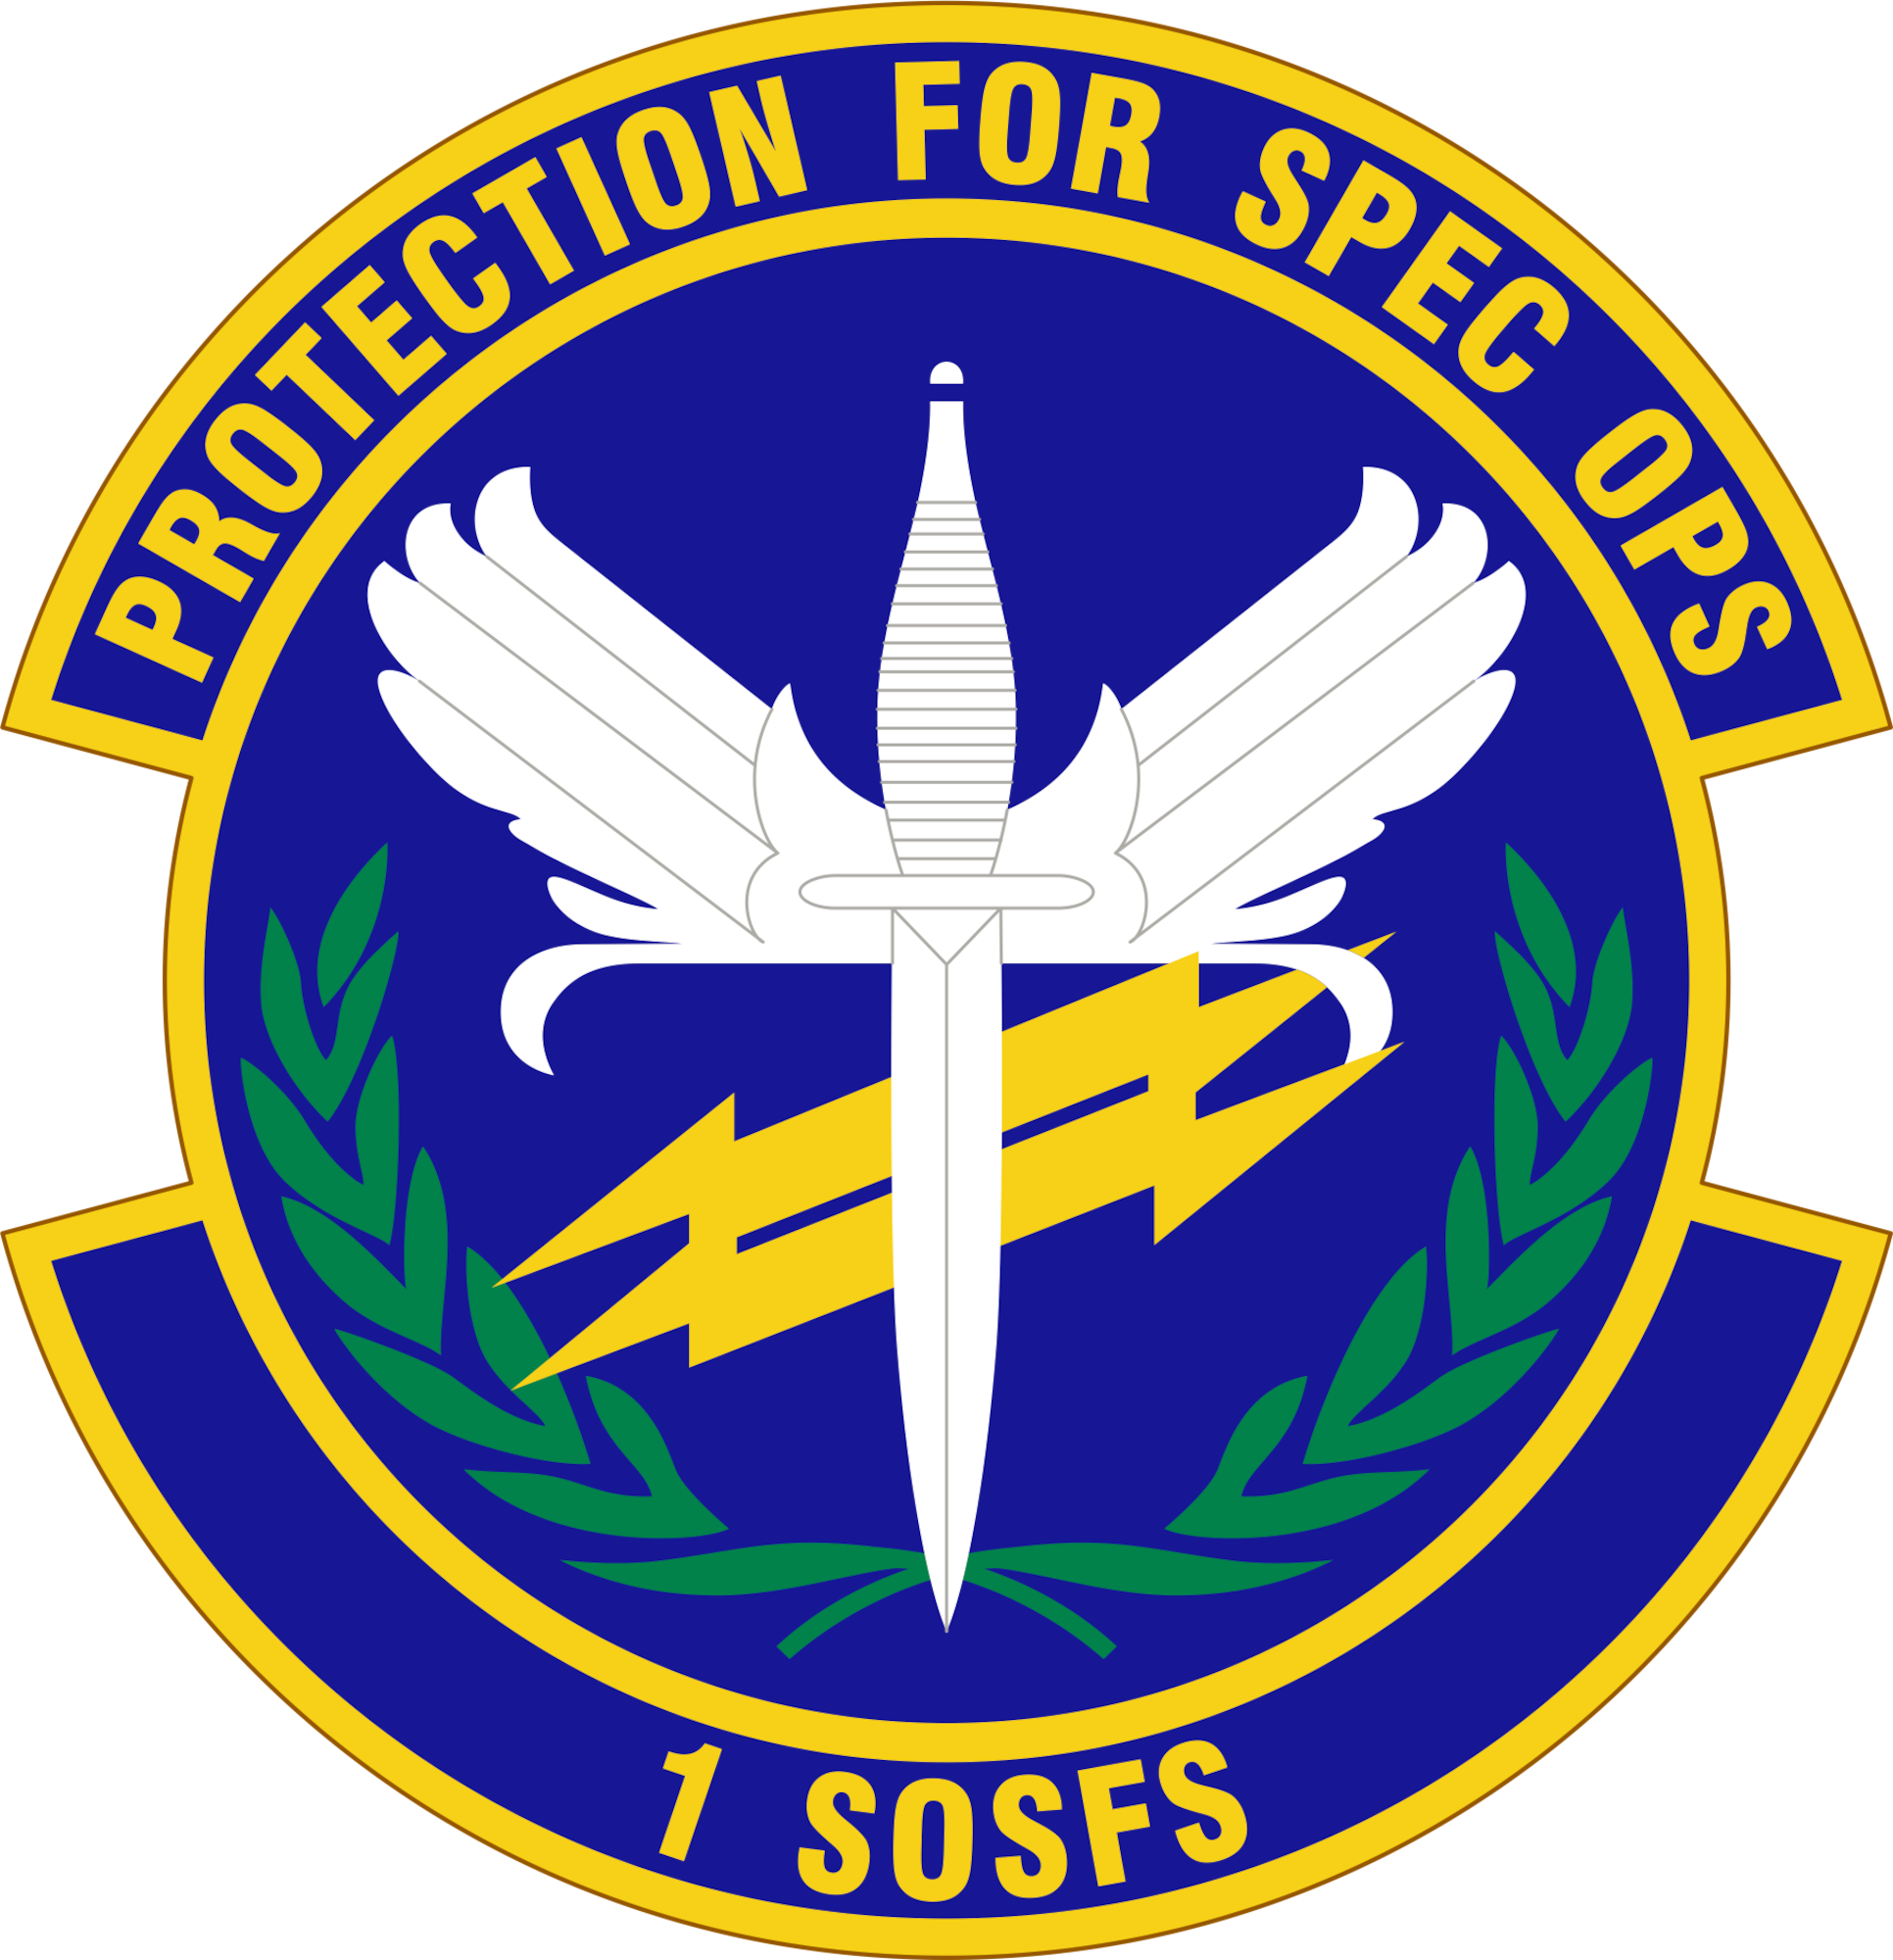 Round shield with top ribbon that reads "Protection for spec ops" and bottom ribbon that reads "1 SOSFS". The center of the shield has a dagger with wings and a double lighting bolt behind it, with a half-cirlce shaped olive brand framing the bottom of the design.